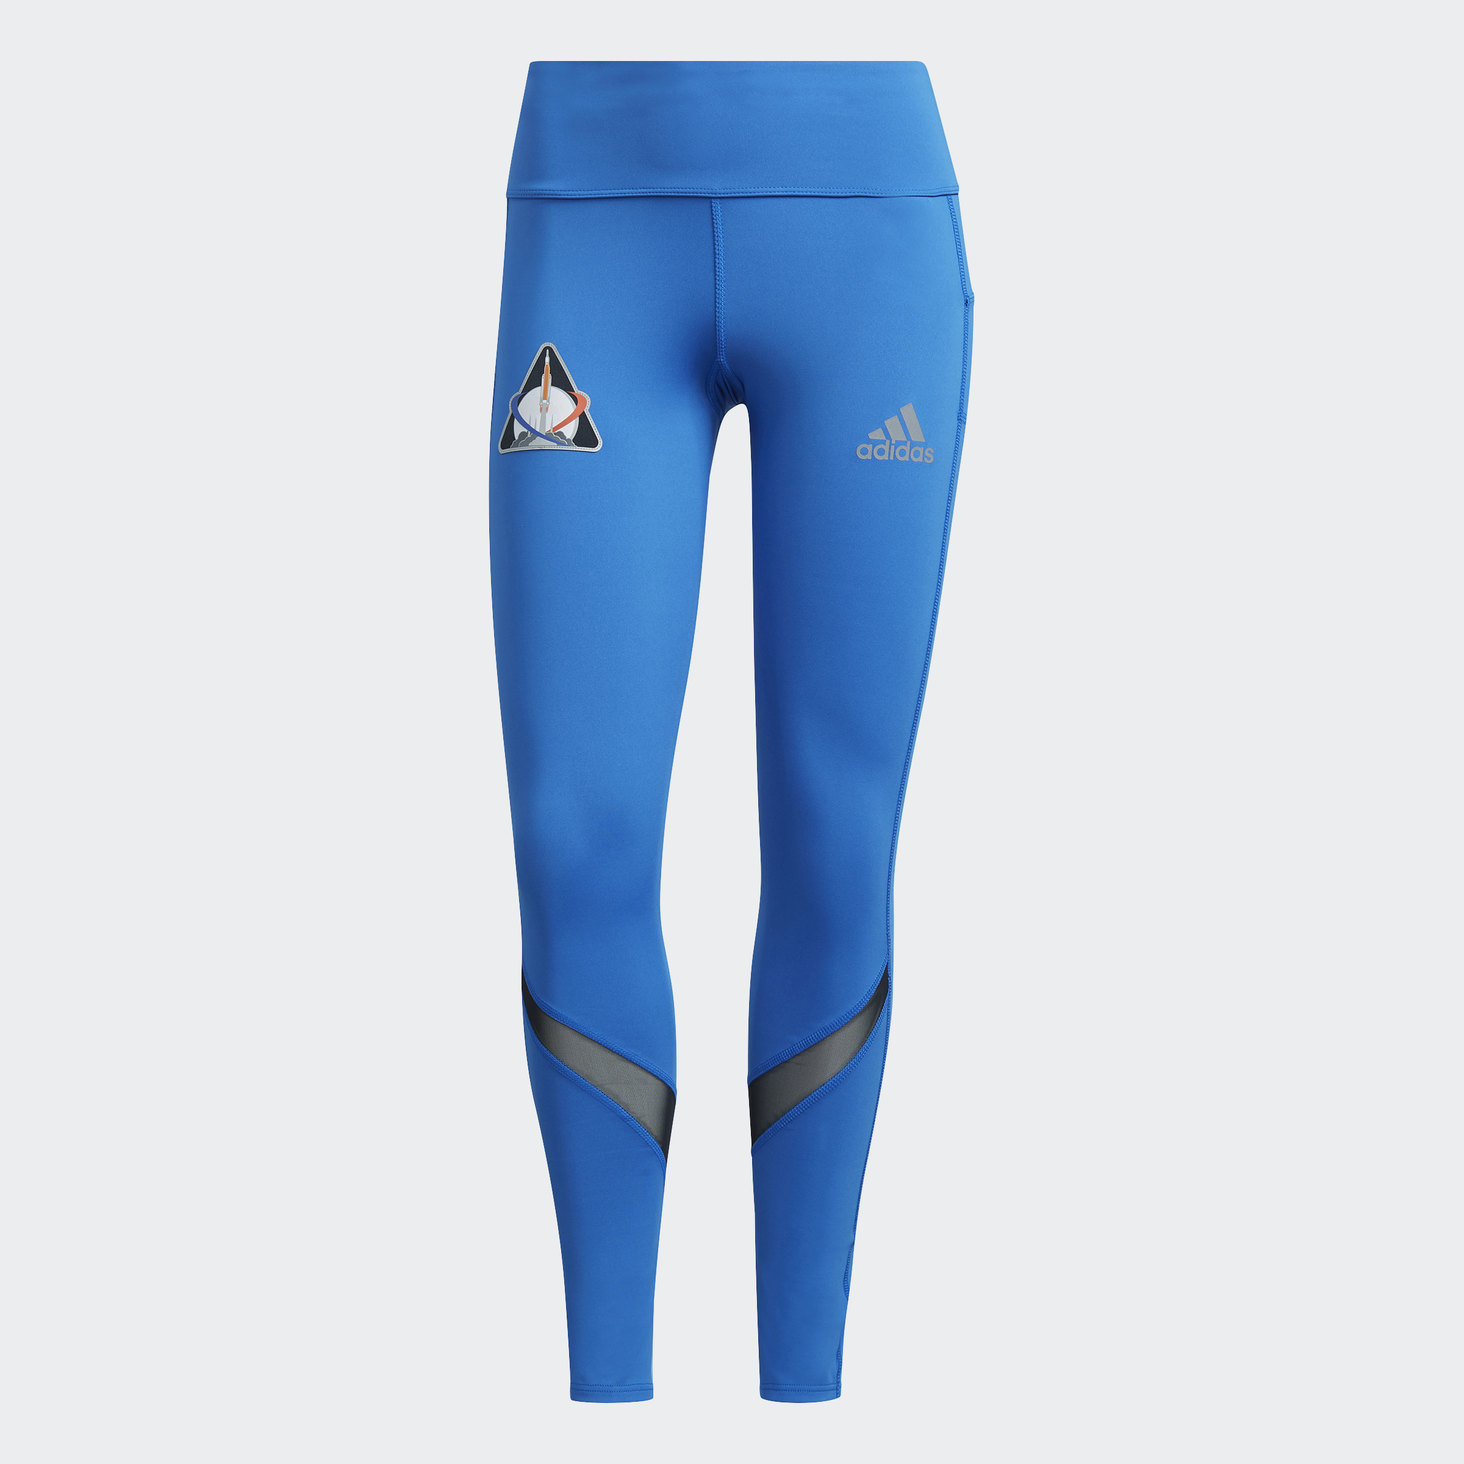 Adidas Leggings Size Society of International Agriculture | 1099 Precision